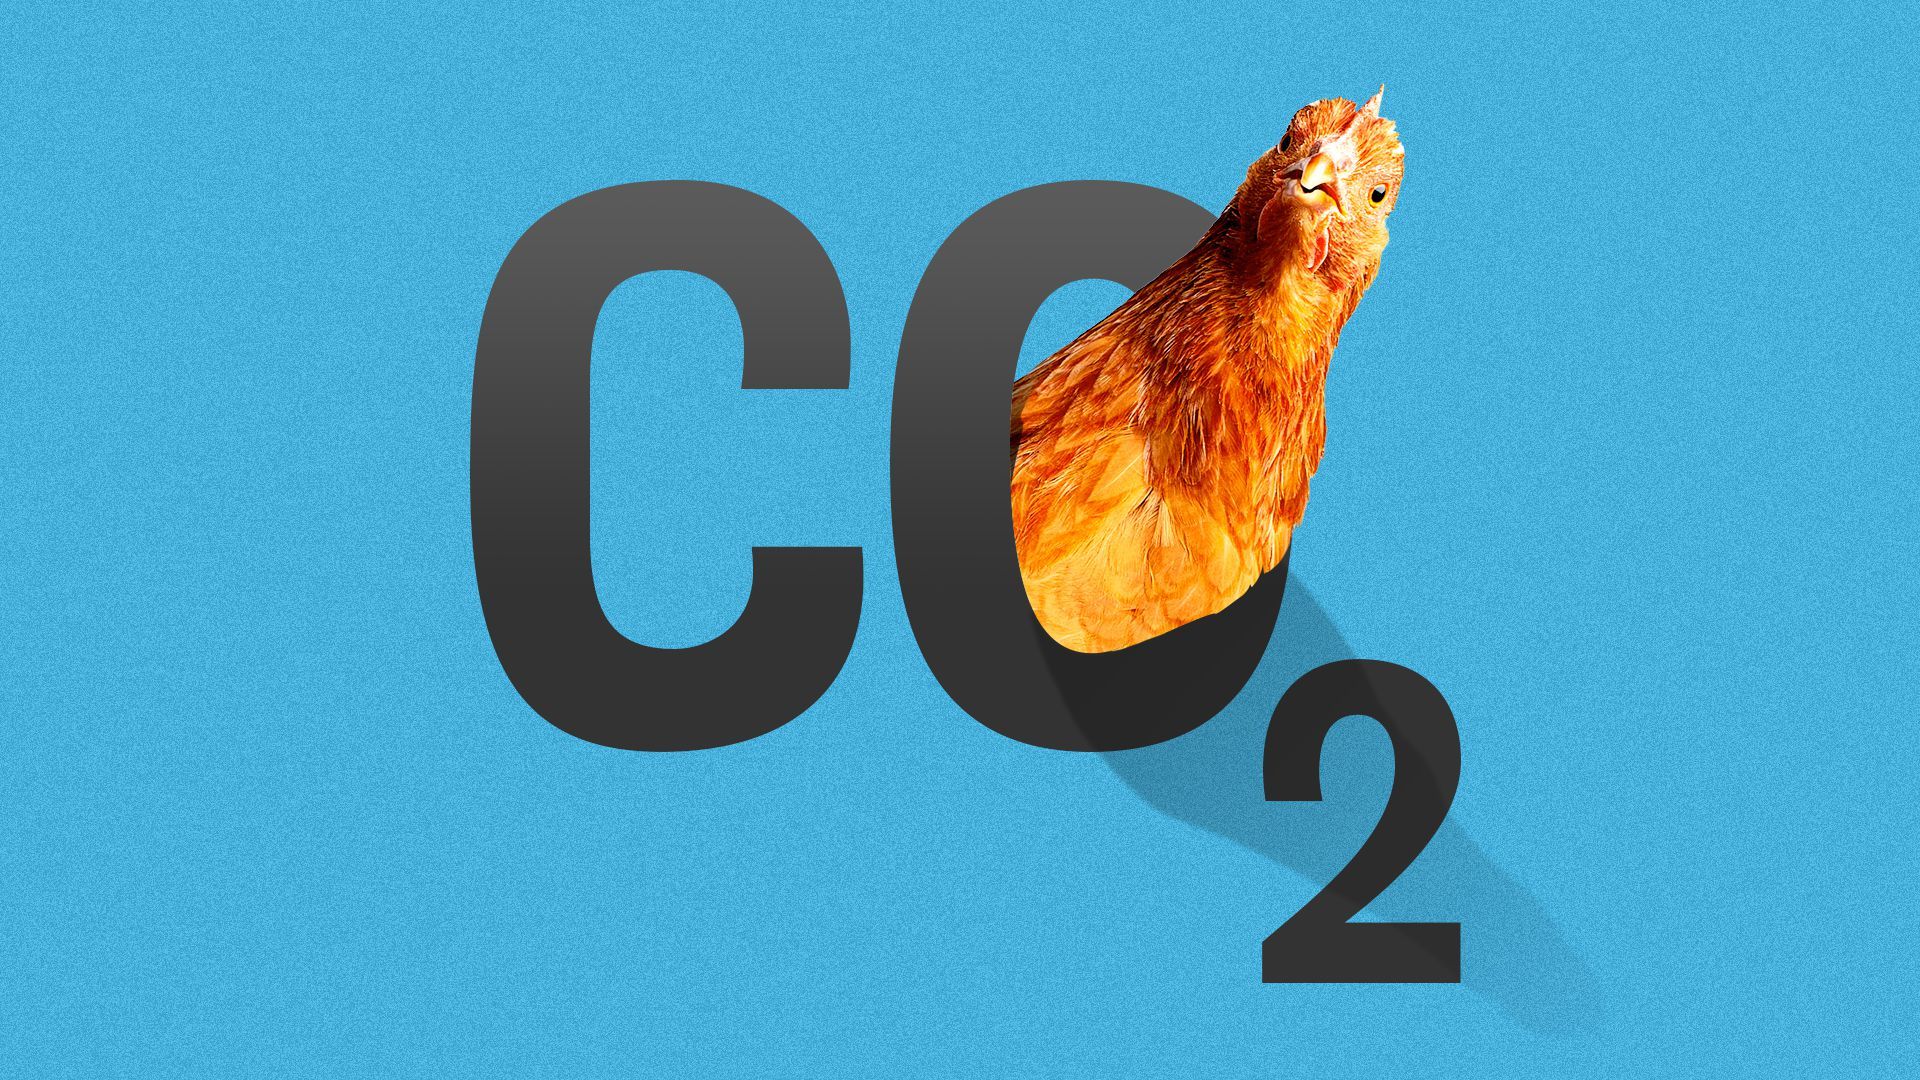 Illustration of a chicken poking his head through the zero in "C02."